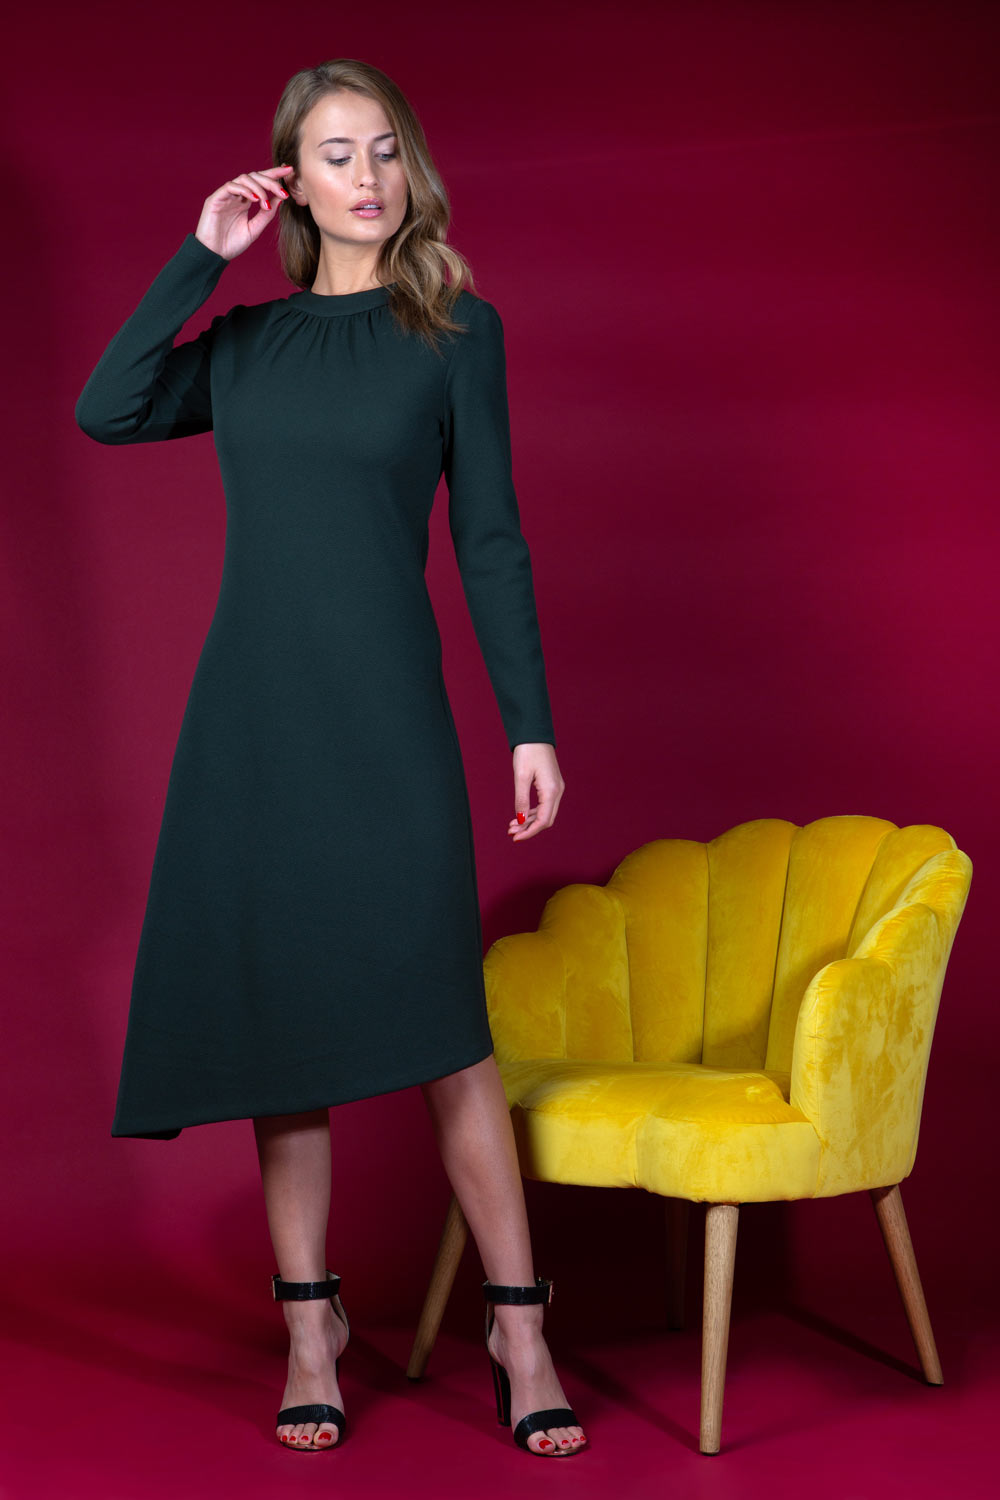 blonde model is wearing diva catwalk dartington asymmetric skirt midaxi long sleeve dress with rounded pleated neckline a-line style in deep green front